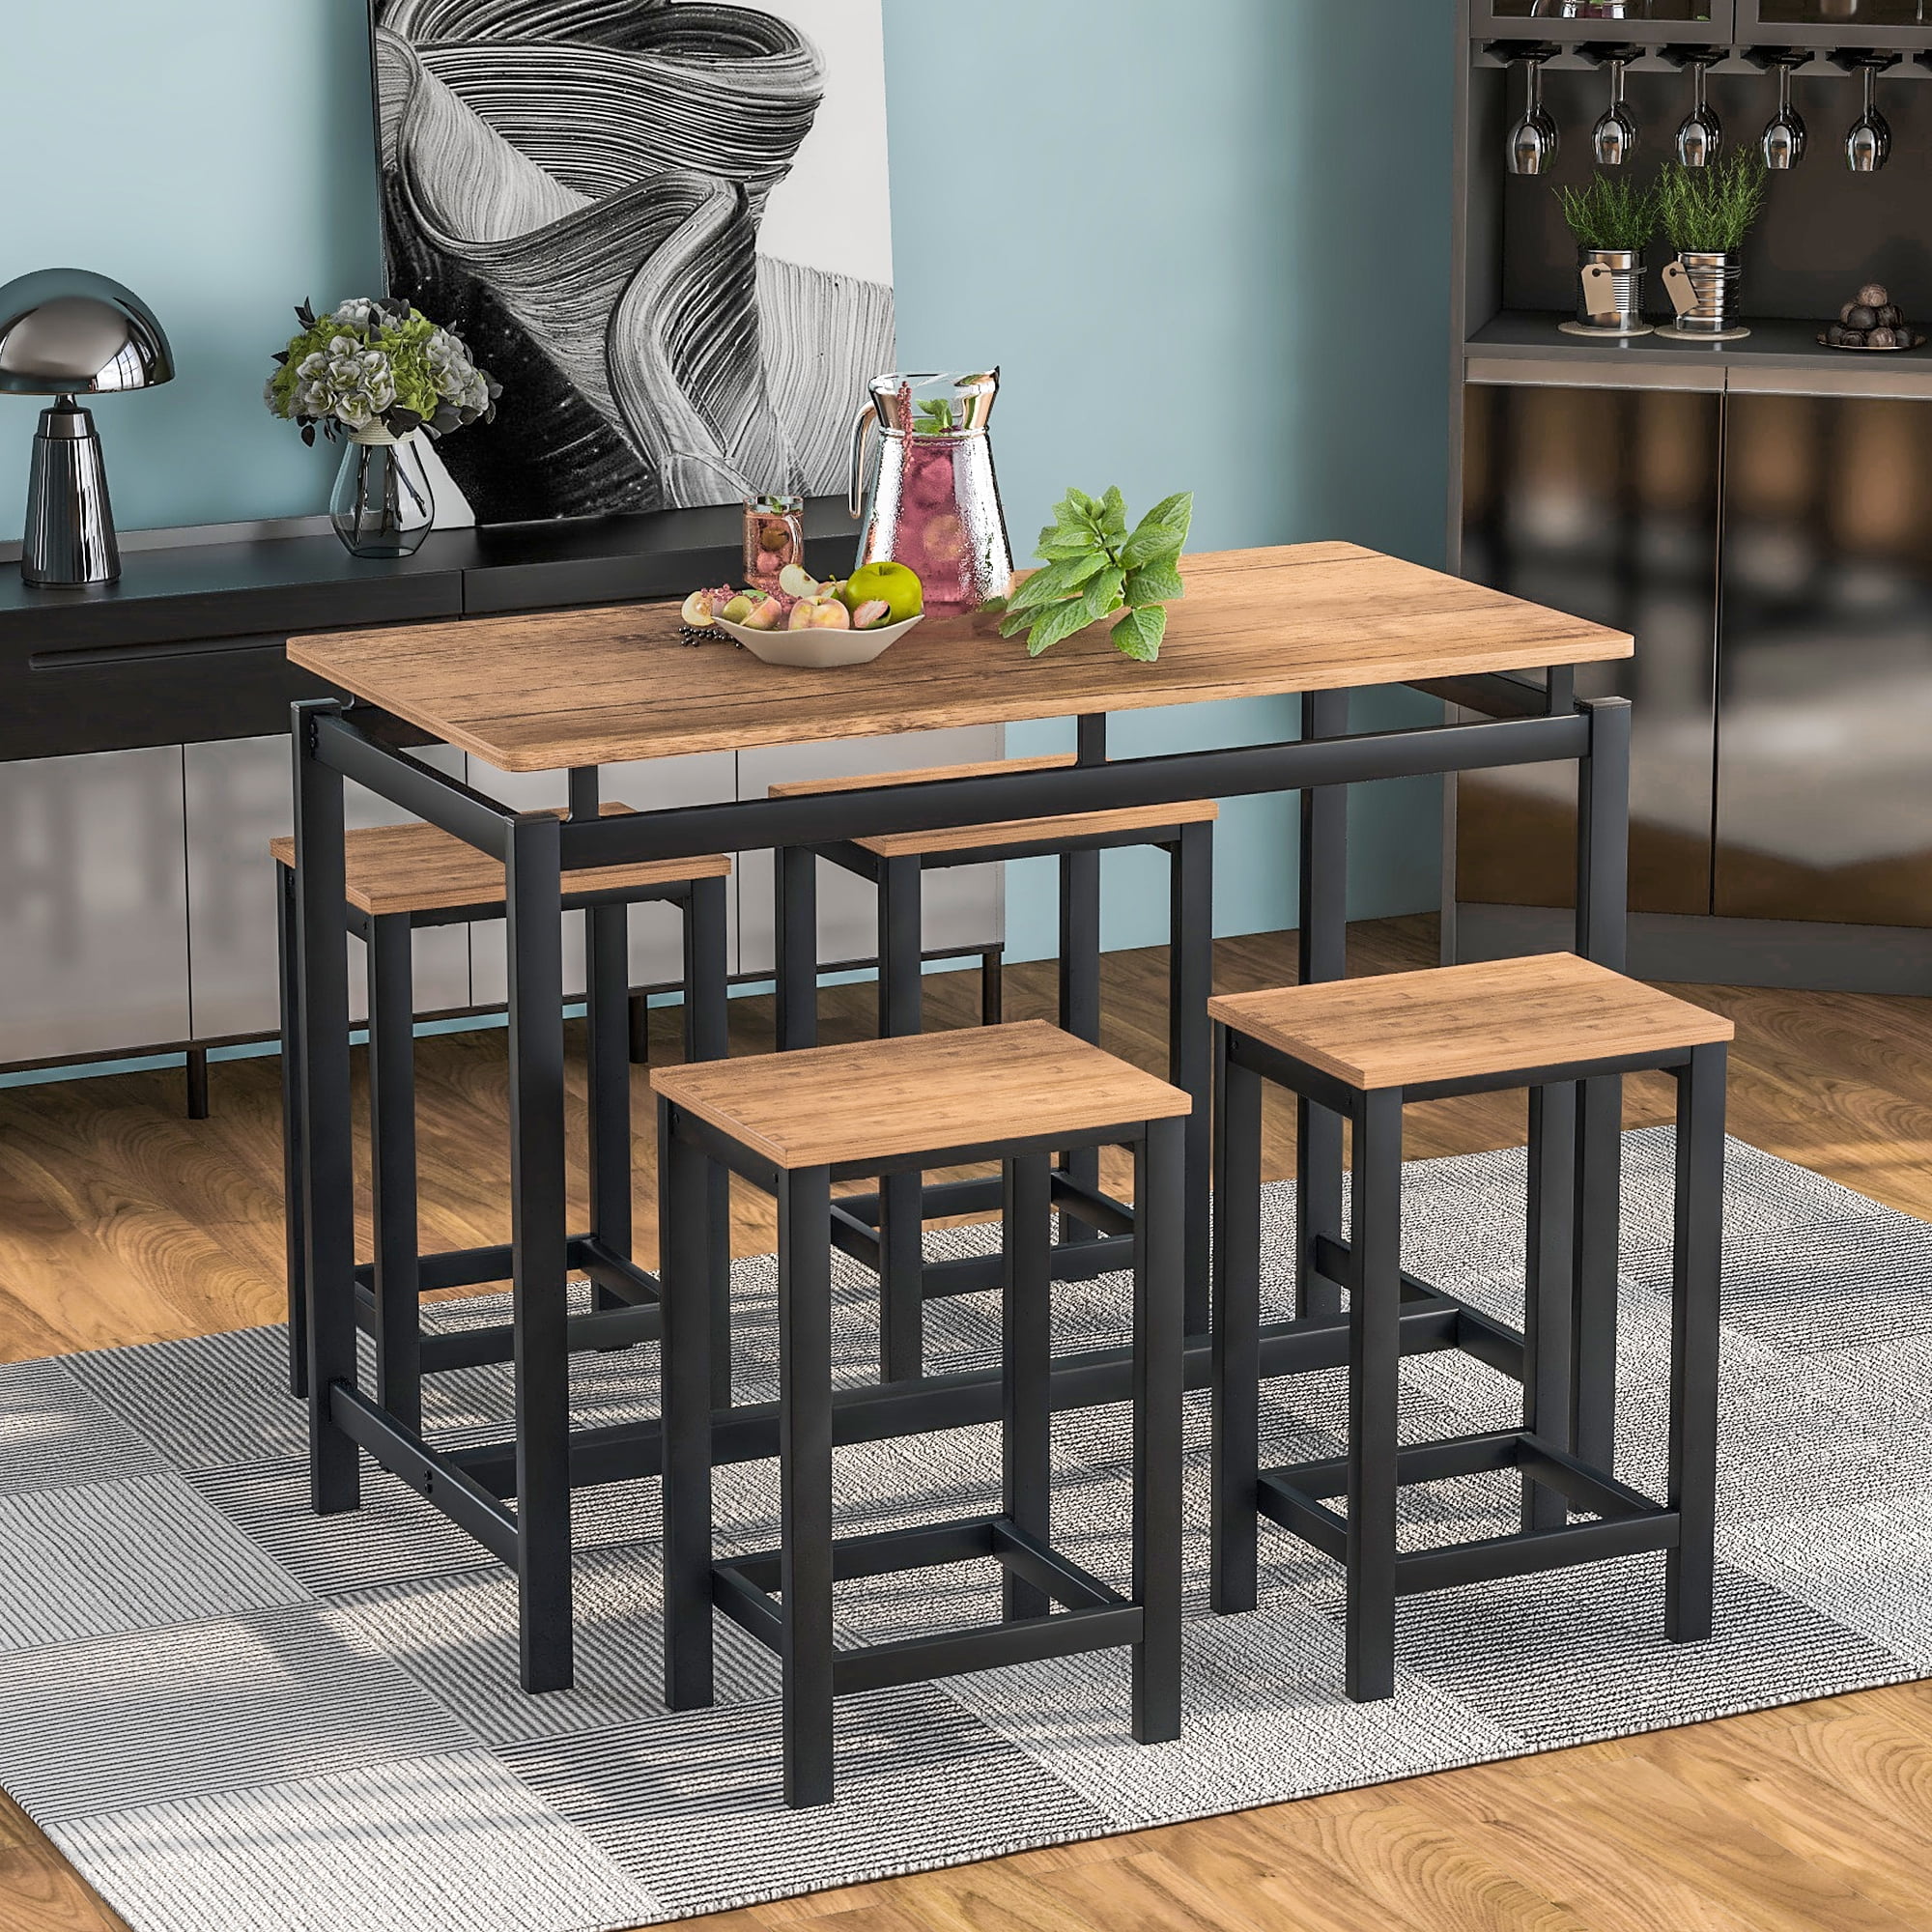 Heavy Duty Dining Table Set, 5 Piece Modern Industrial Dining Room